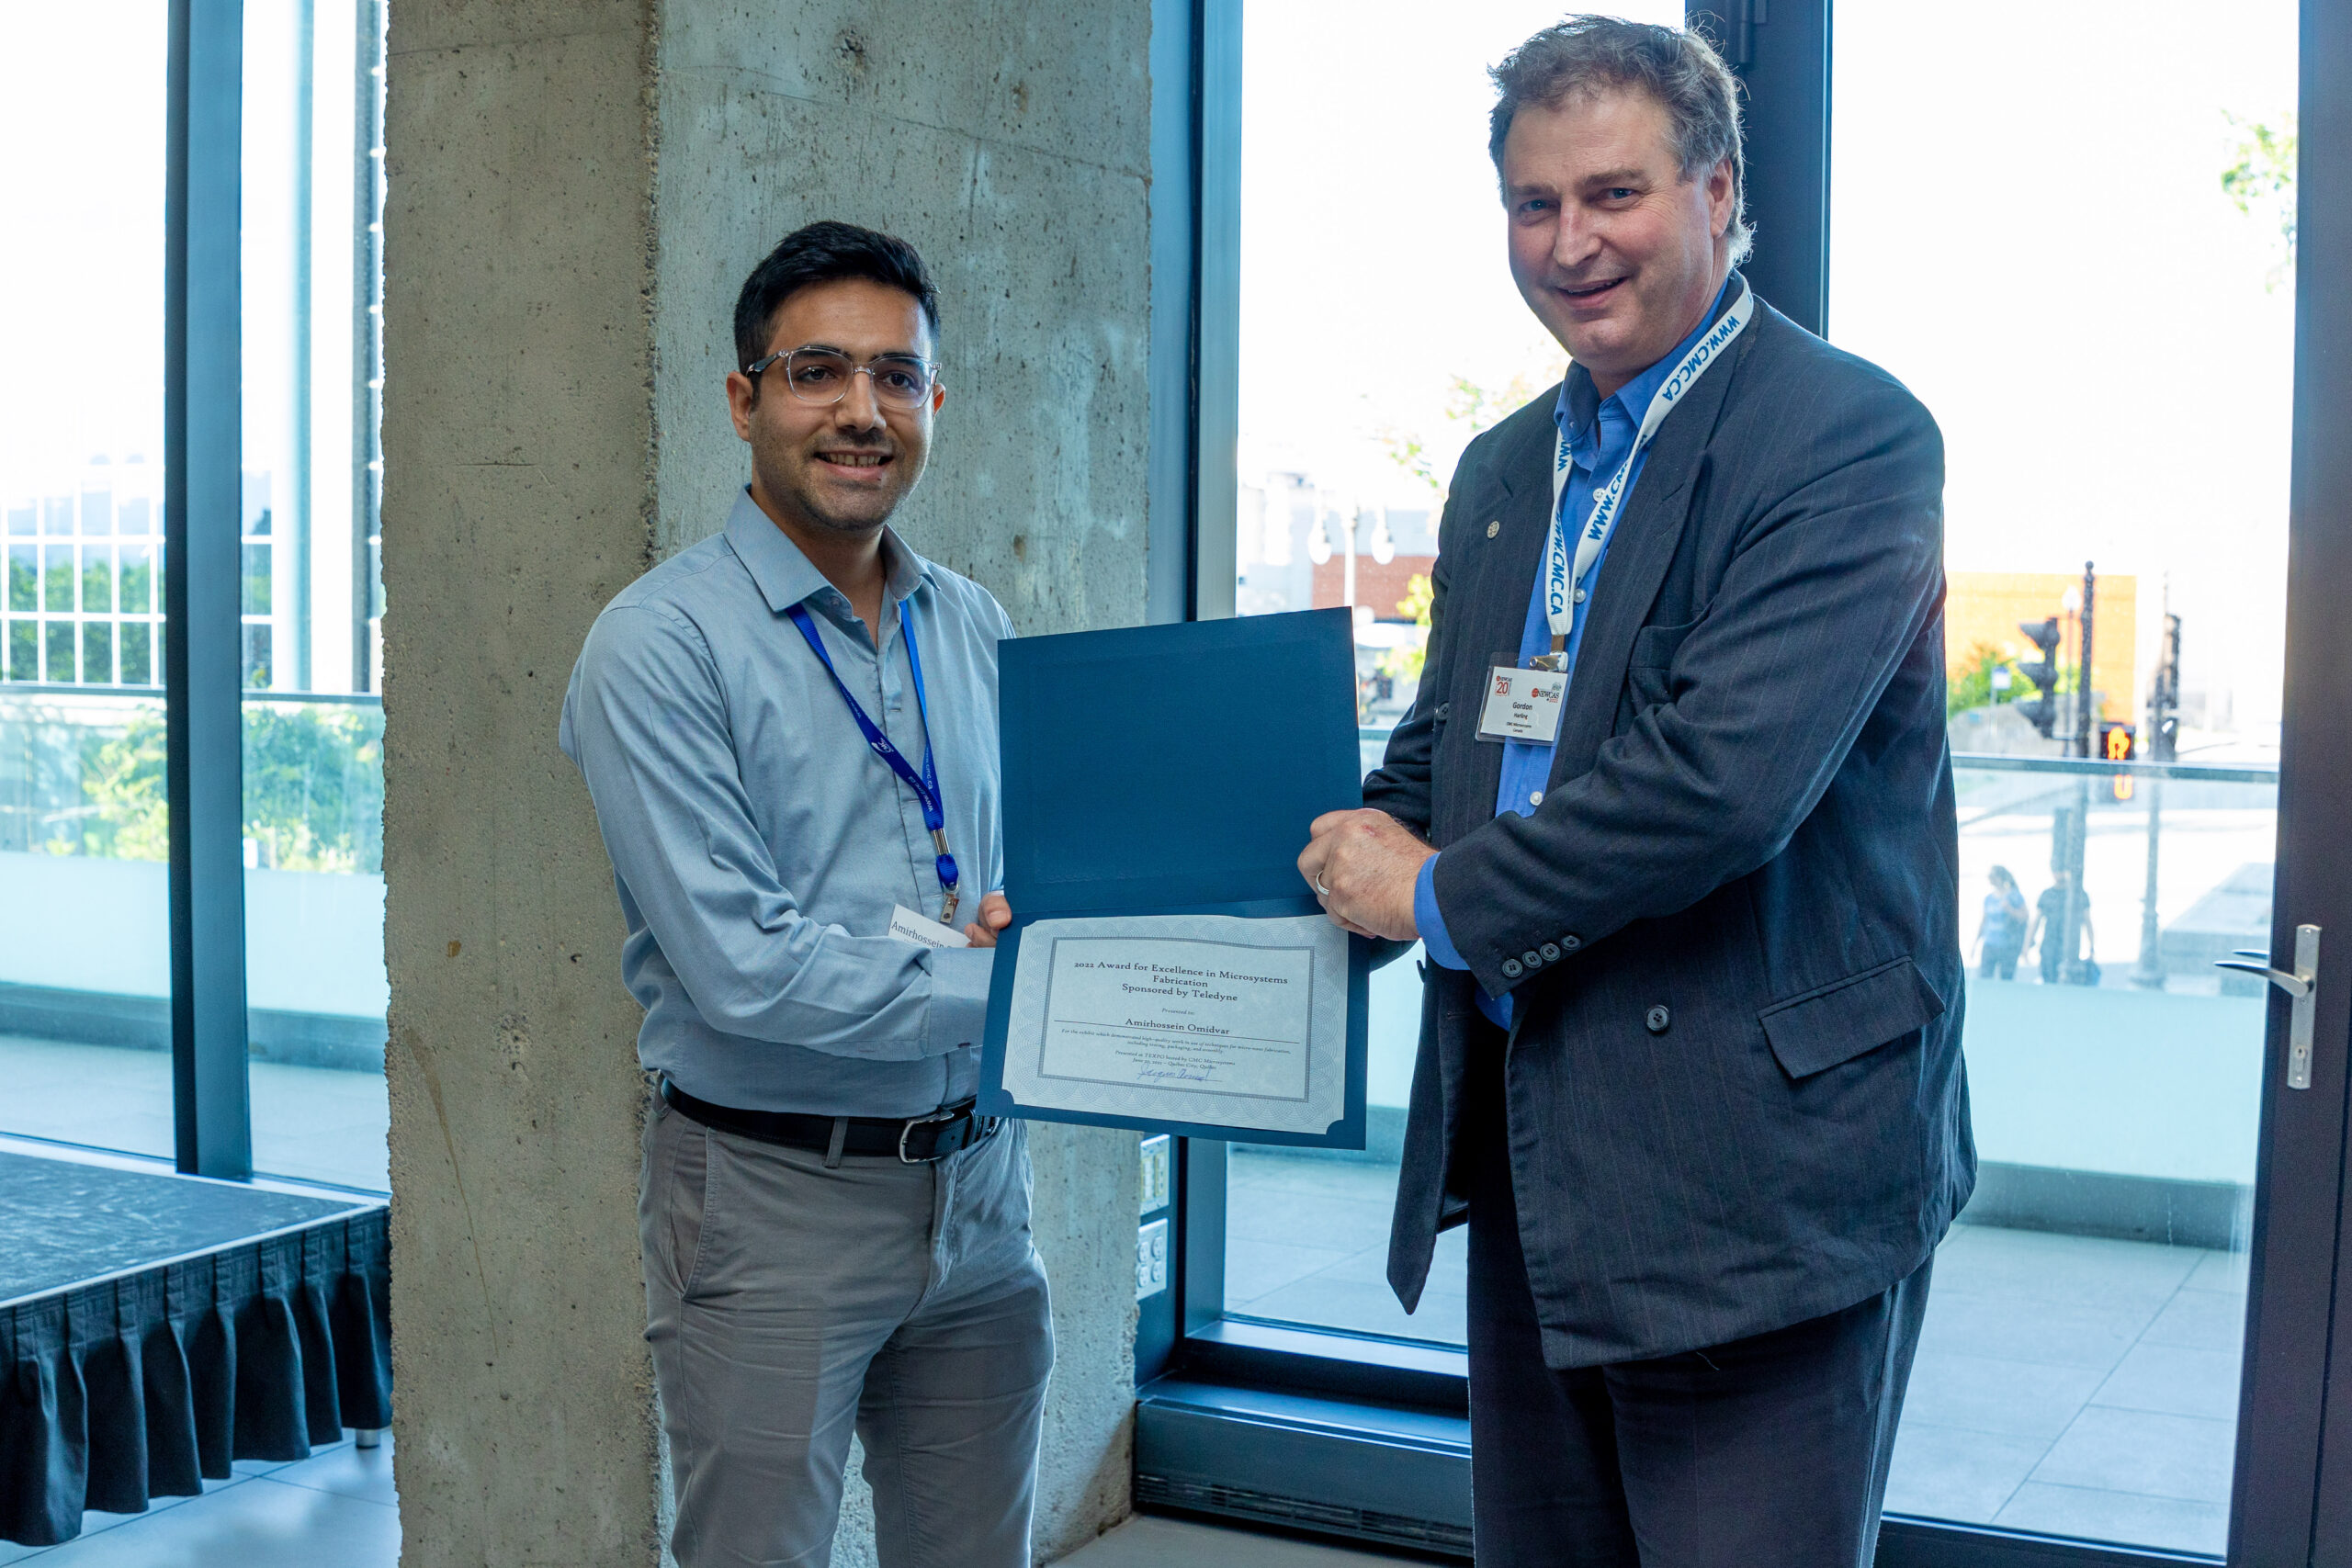 Award for Excellence in Microsystems Fabrication (Amirhossein Omidvar, University of British Columbia)